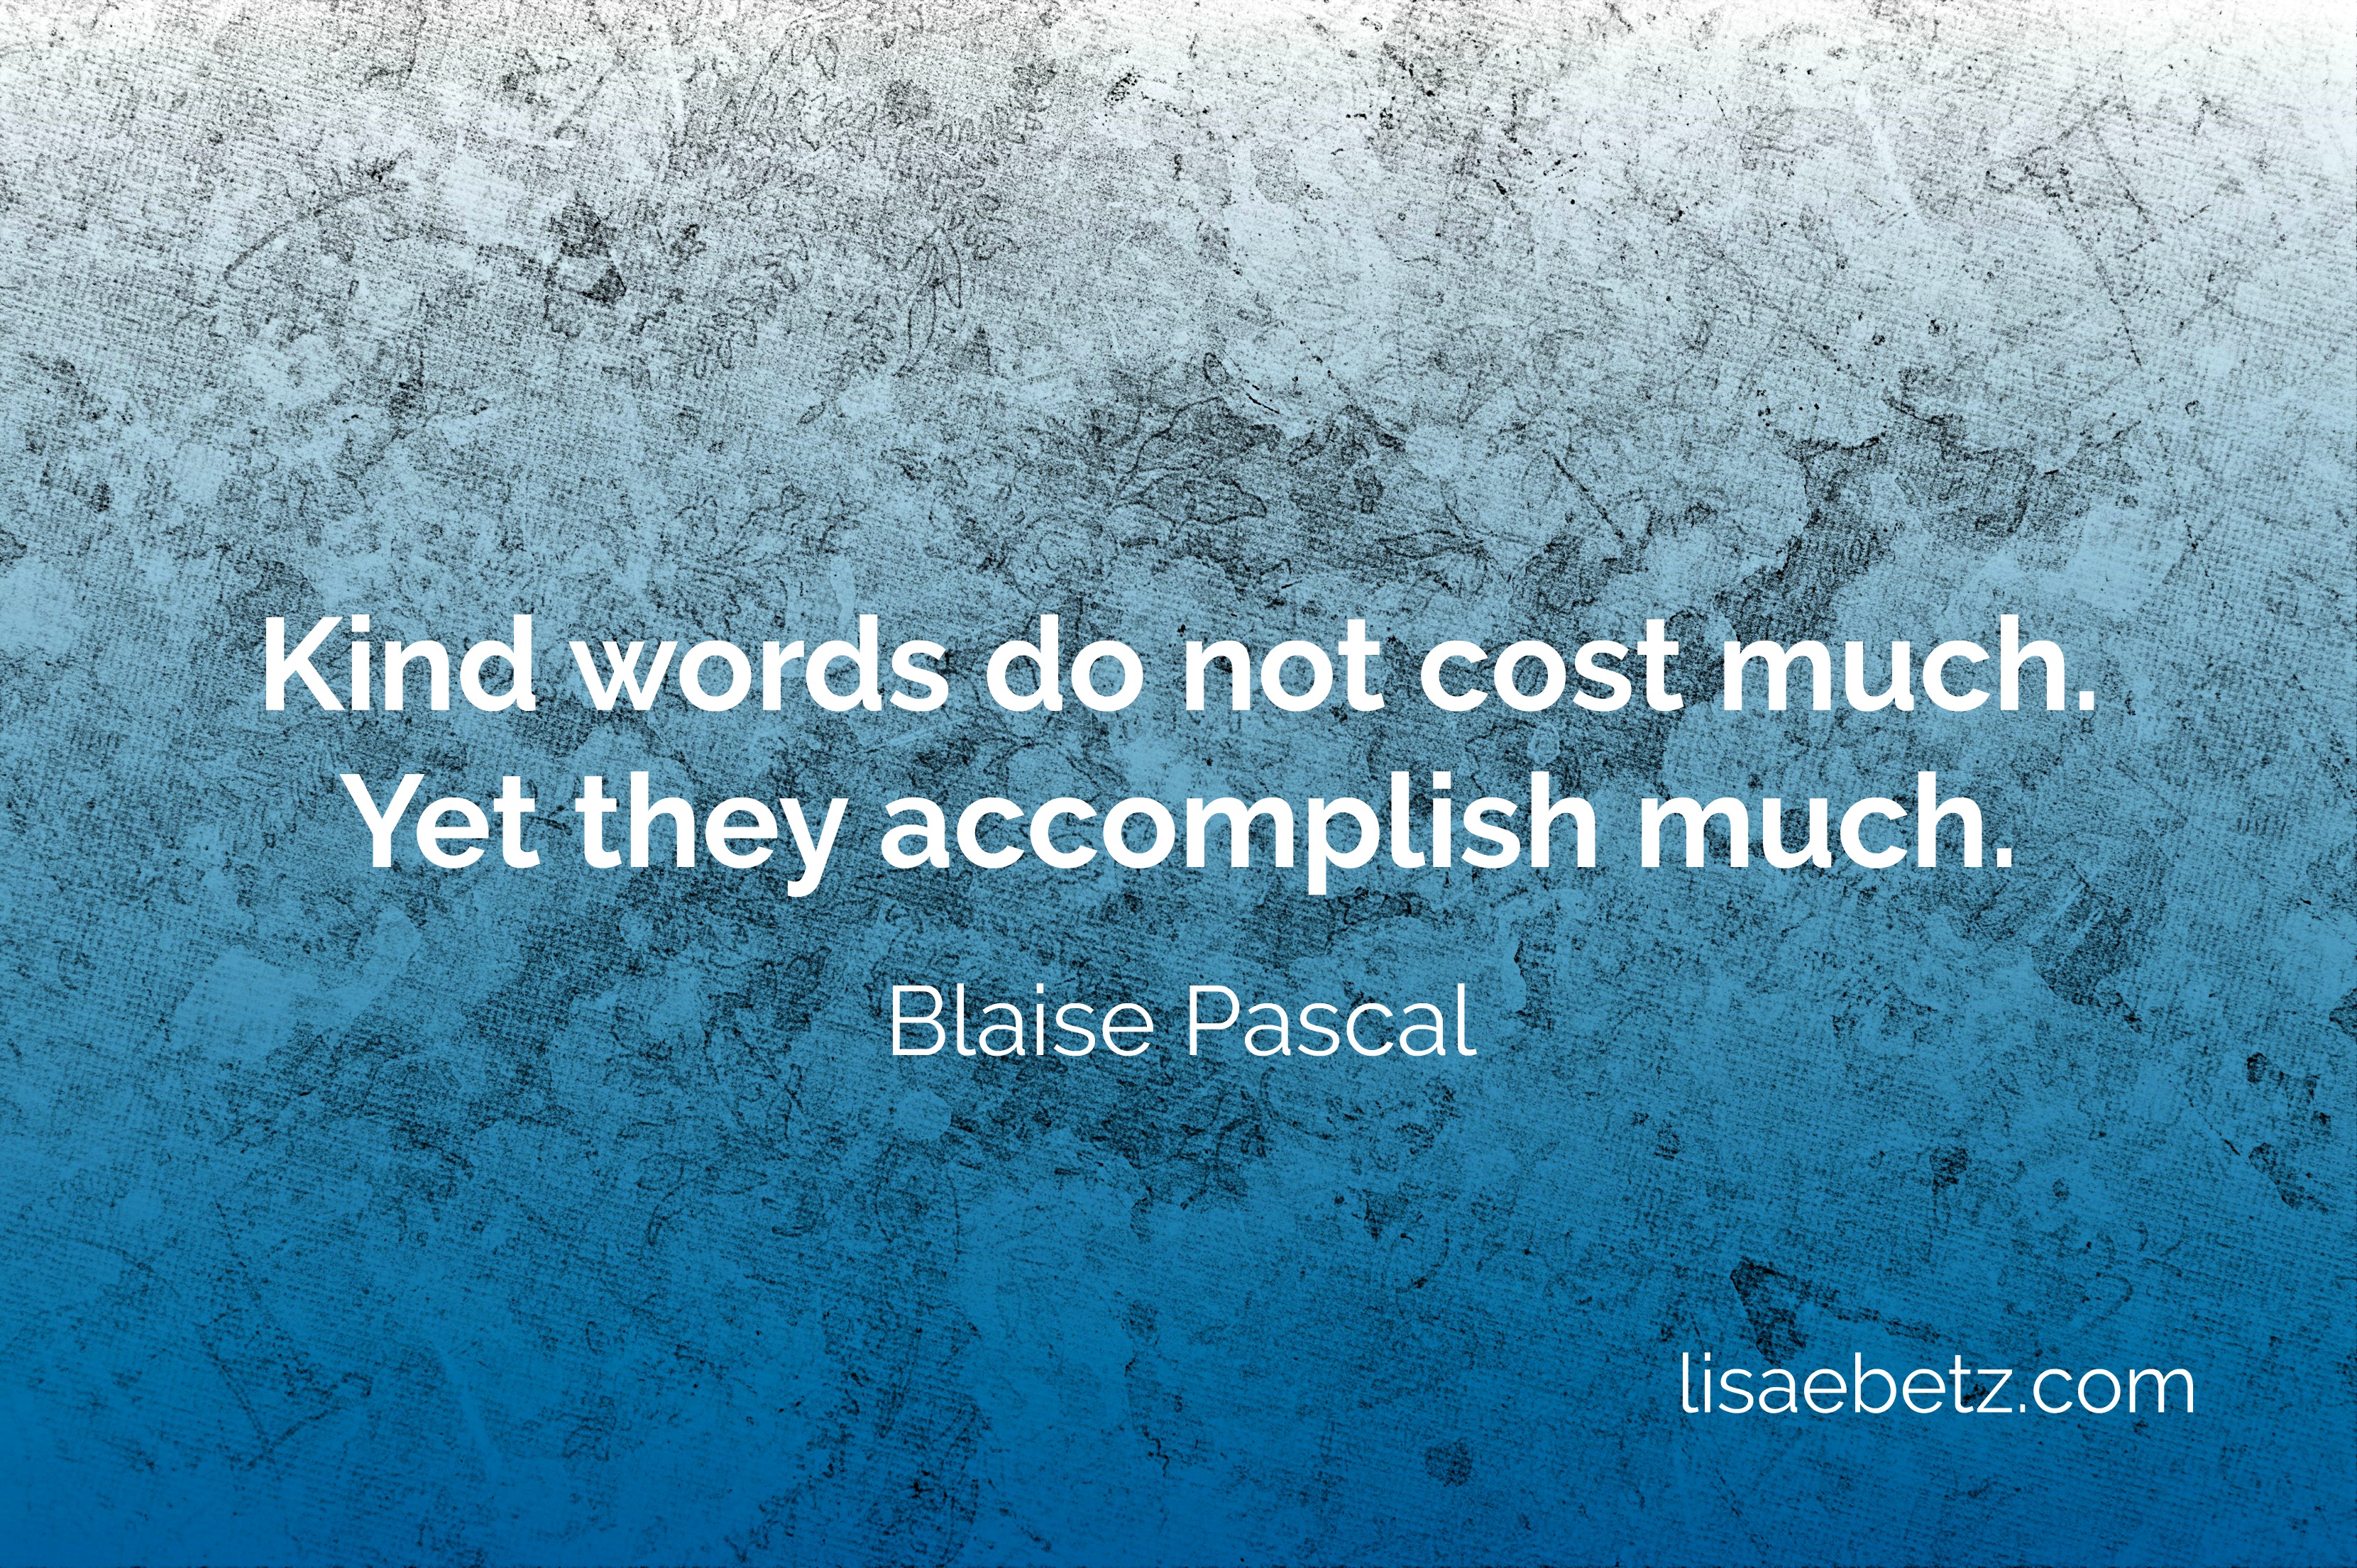 kind words do not cost much. Yet they accomplish much.